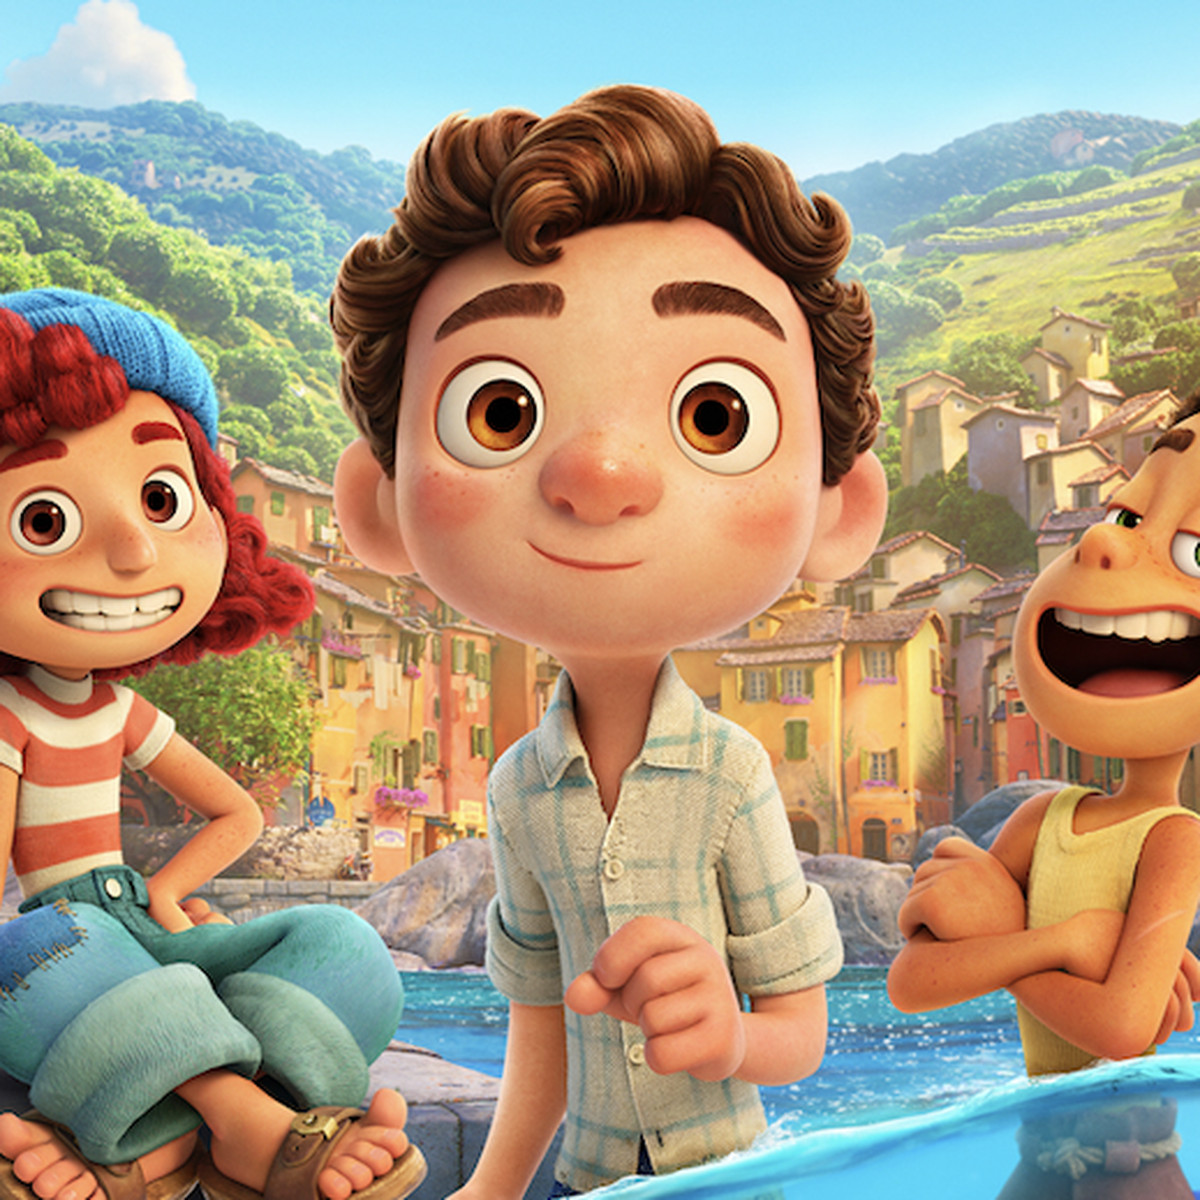 the poster for luca, revealing a boy standing at the center. his feet are in water and they are scaly and sea monster-like, next to him is a smiling boy with the same sea monster bottom, and a girl on land